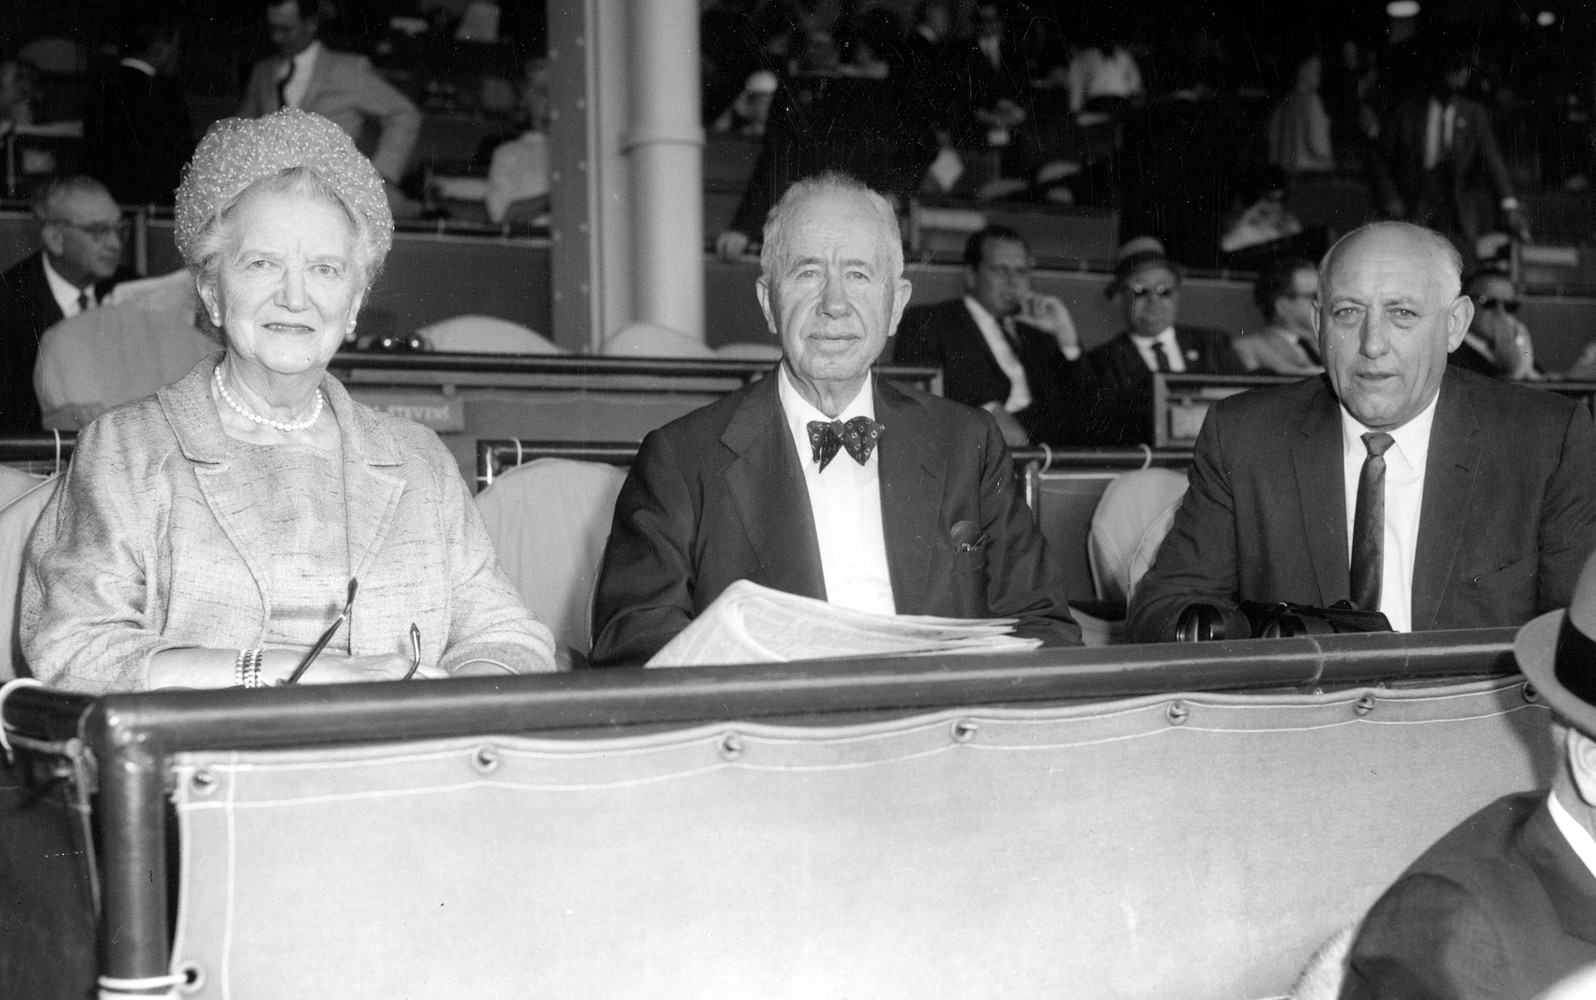 Helen and Christopher T. Chenery with Casey Hales at Hialeah Park (Keeneland Library Morgan Collection)